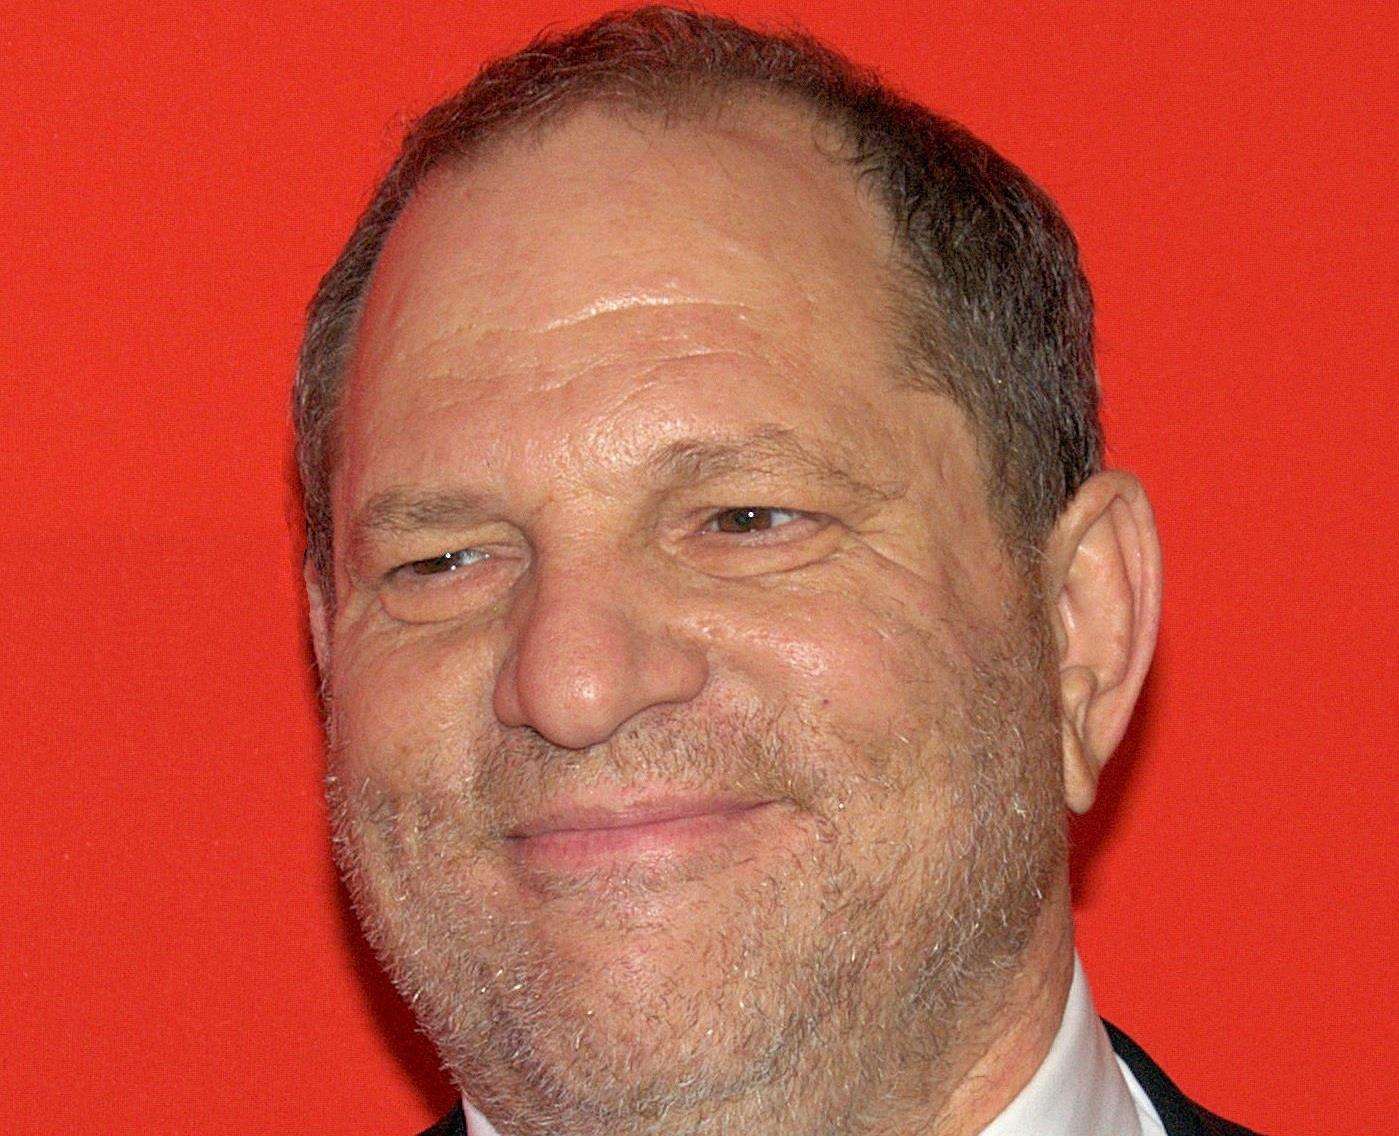 Hollywood producer Harvey Weinstein is facing sexual assault allegations;